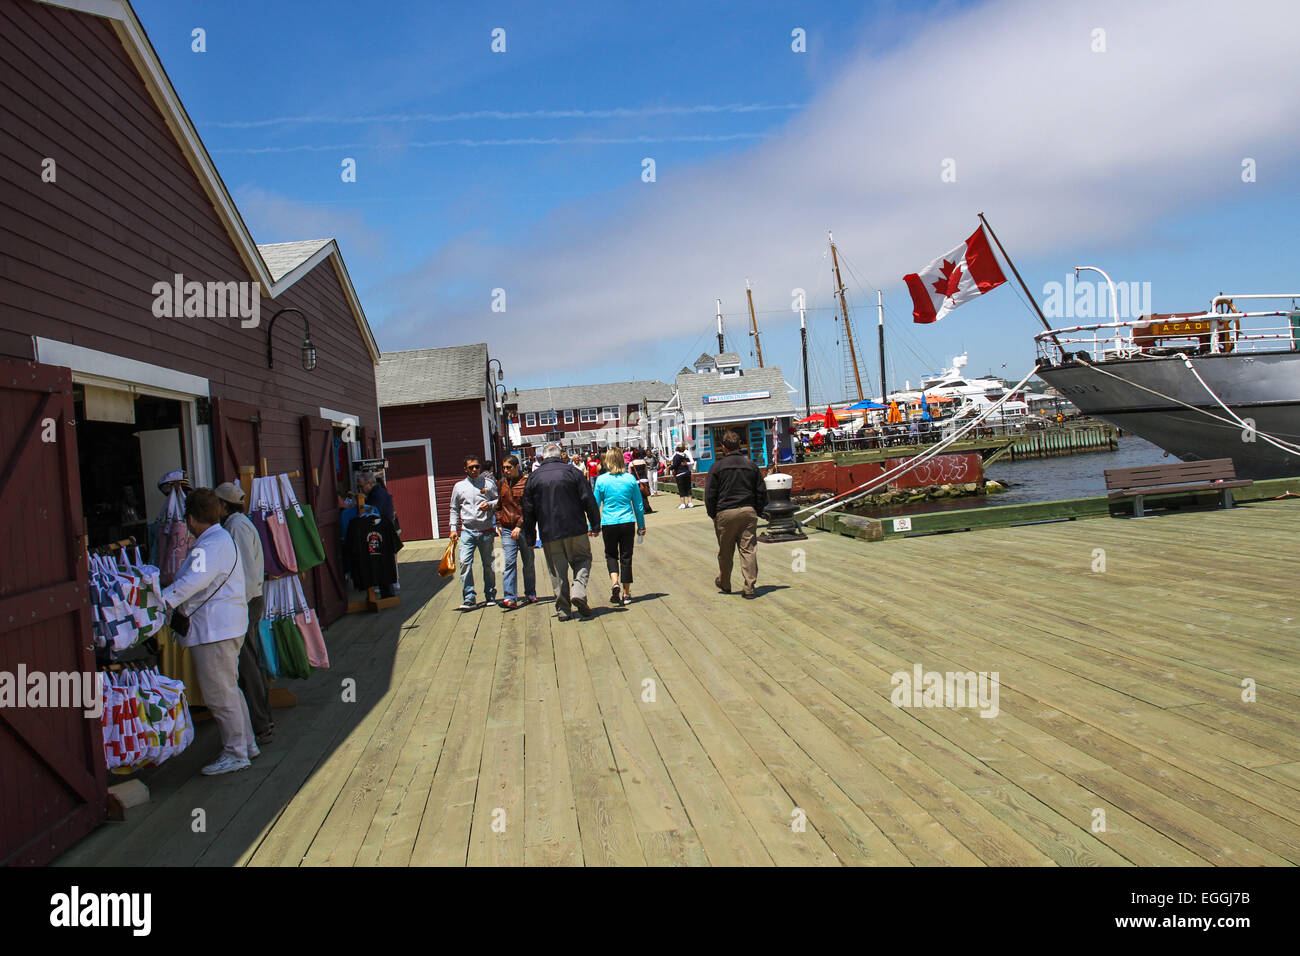 The boardwalk along the waterfront in Halifax, N.S. Stock Photo